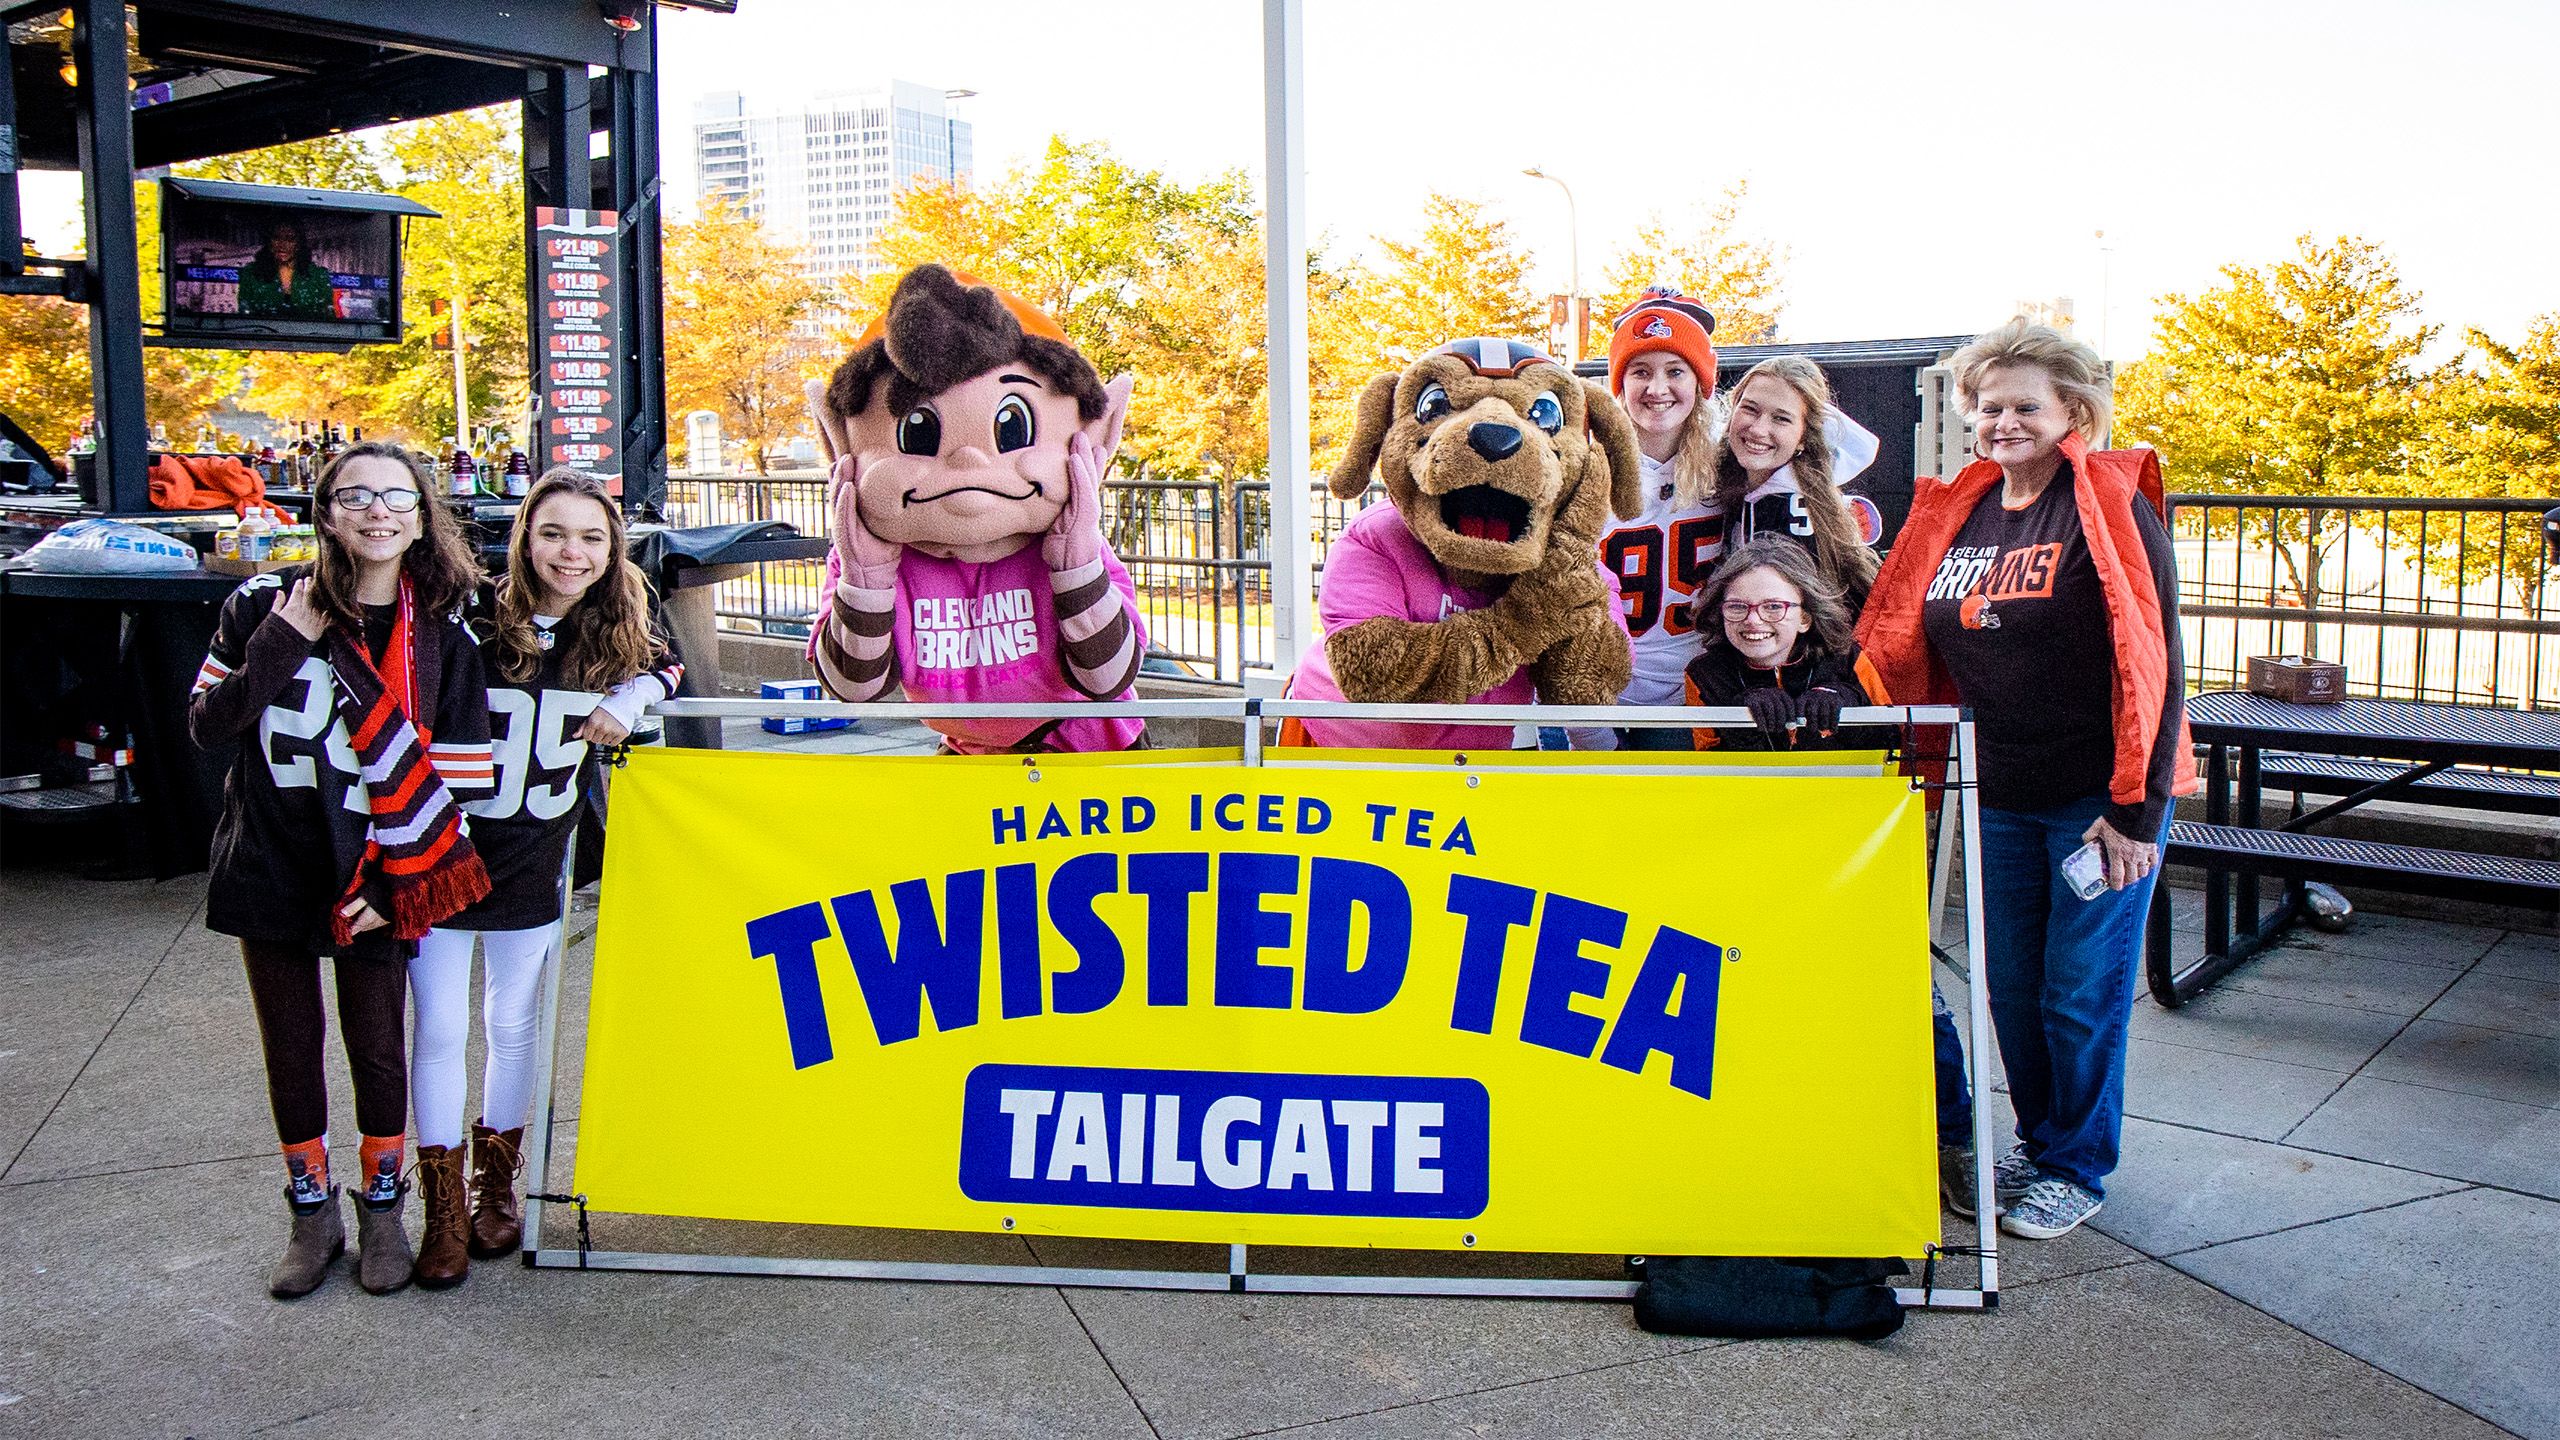 Cleveland Browns tailgating essentials for 2022 season